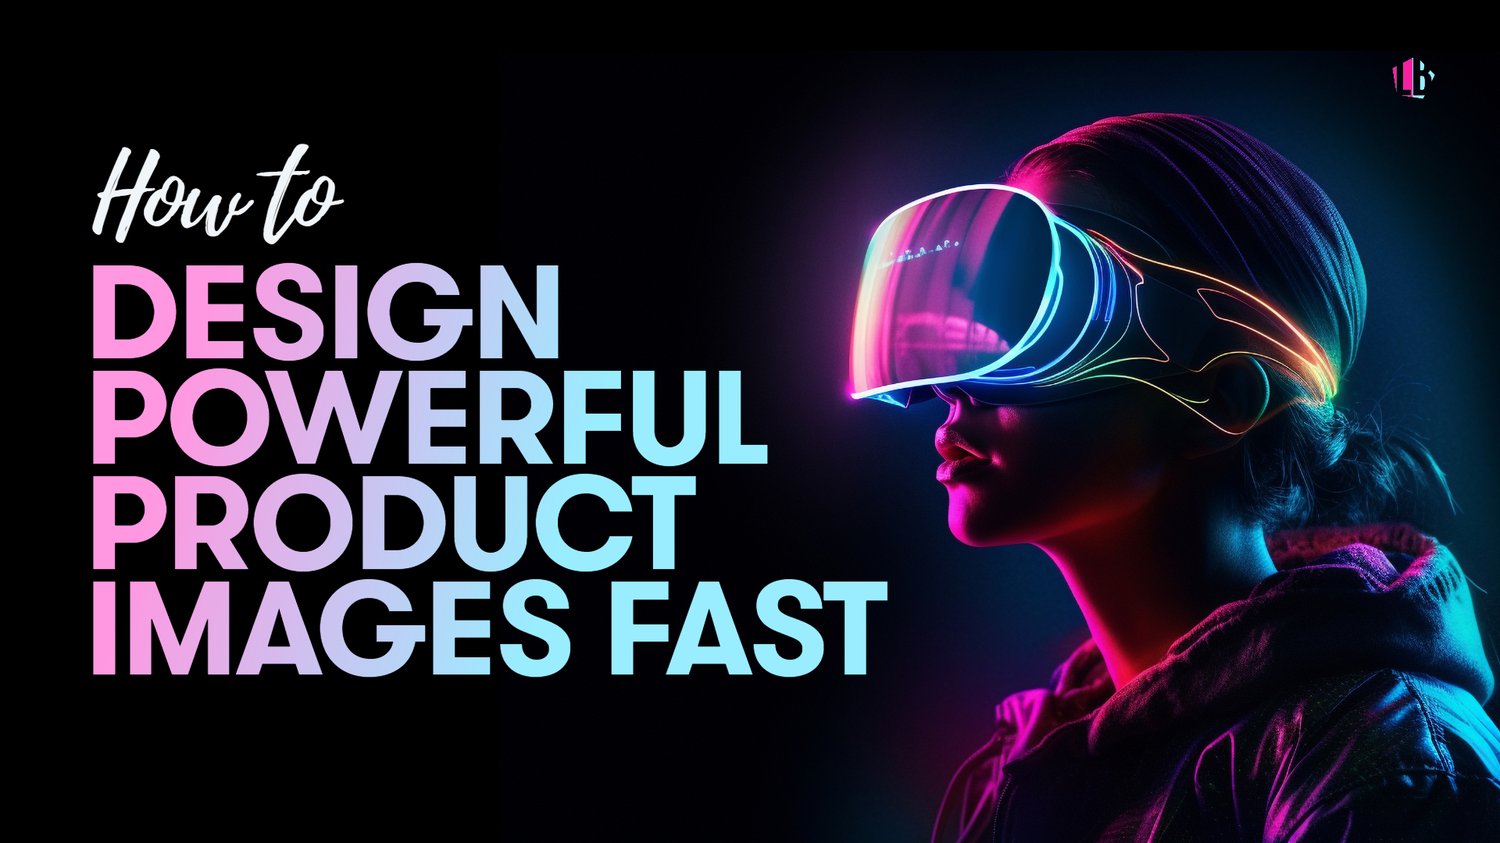 How to design powerful product images fast